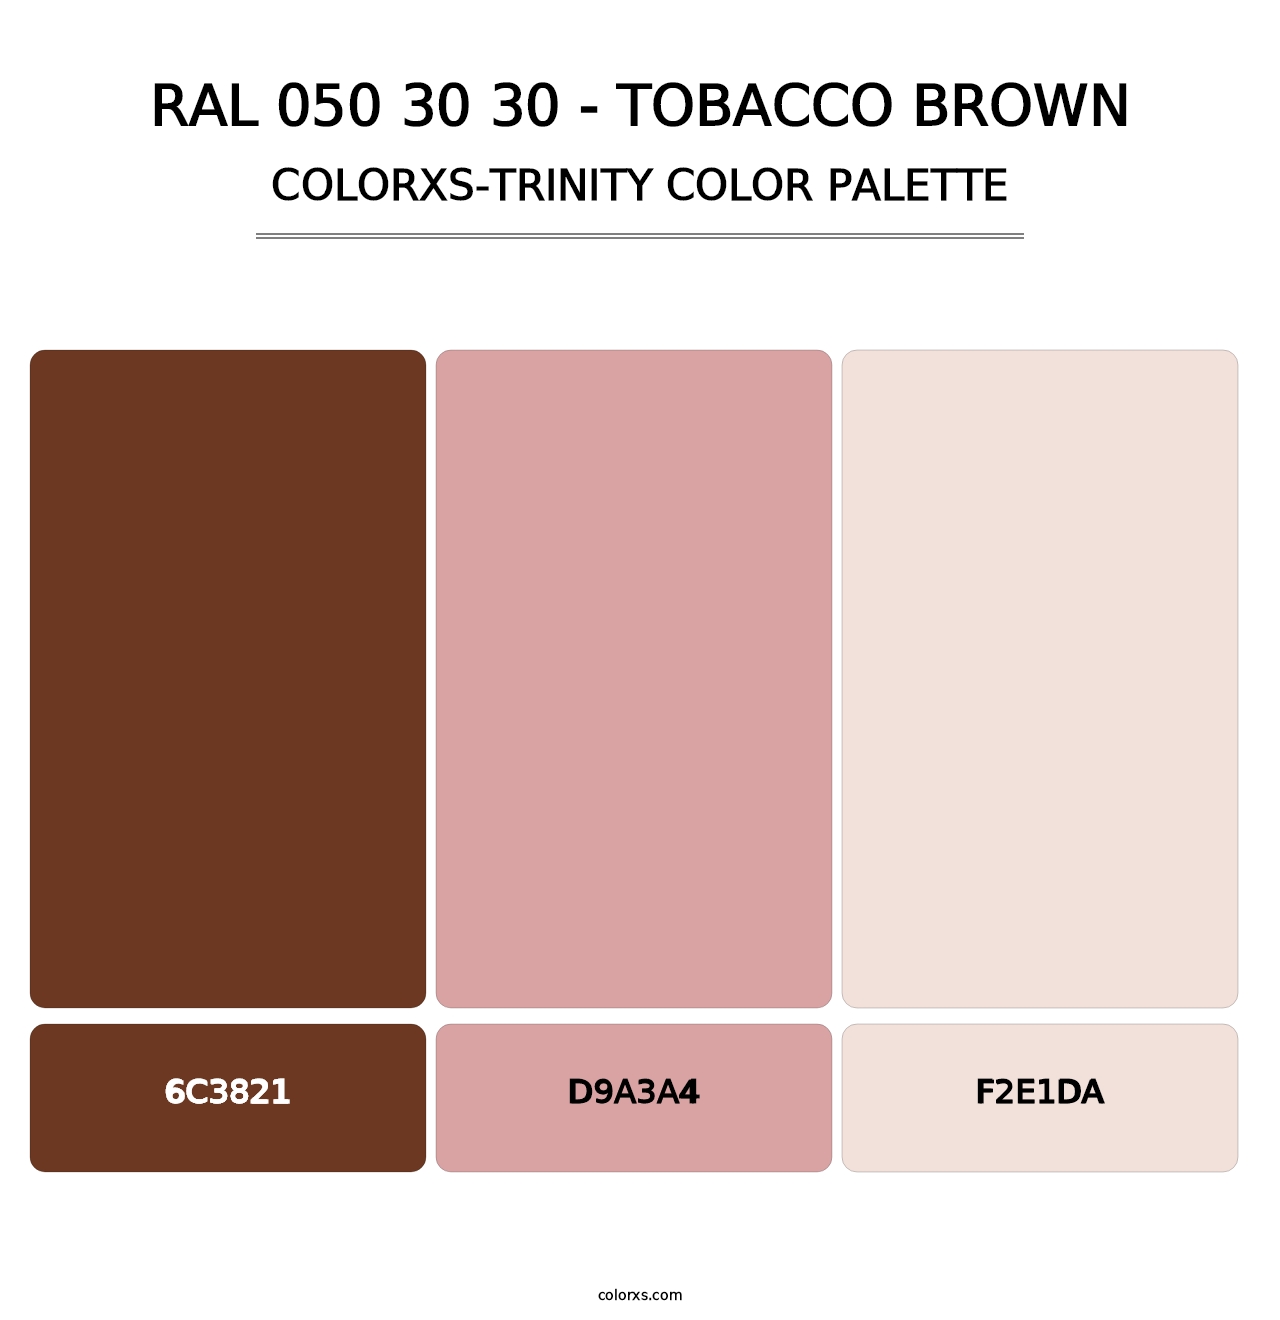 RAL 050 30 30 - Tobacco Brown - Colorxs Trinity Palette